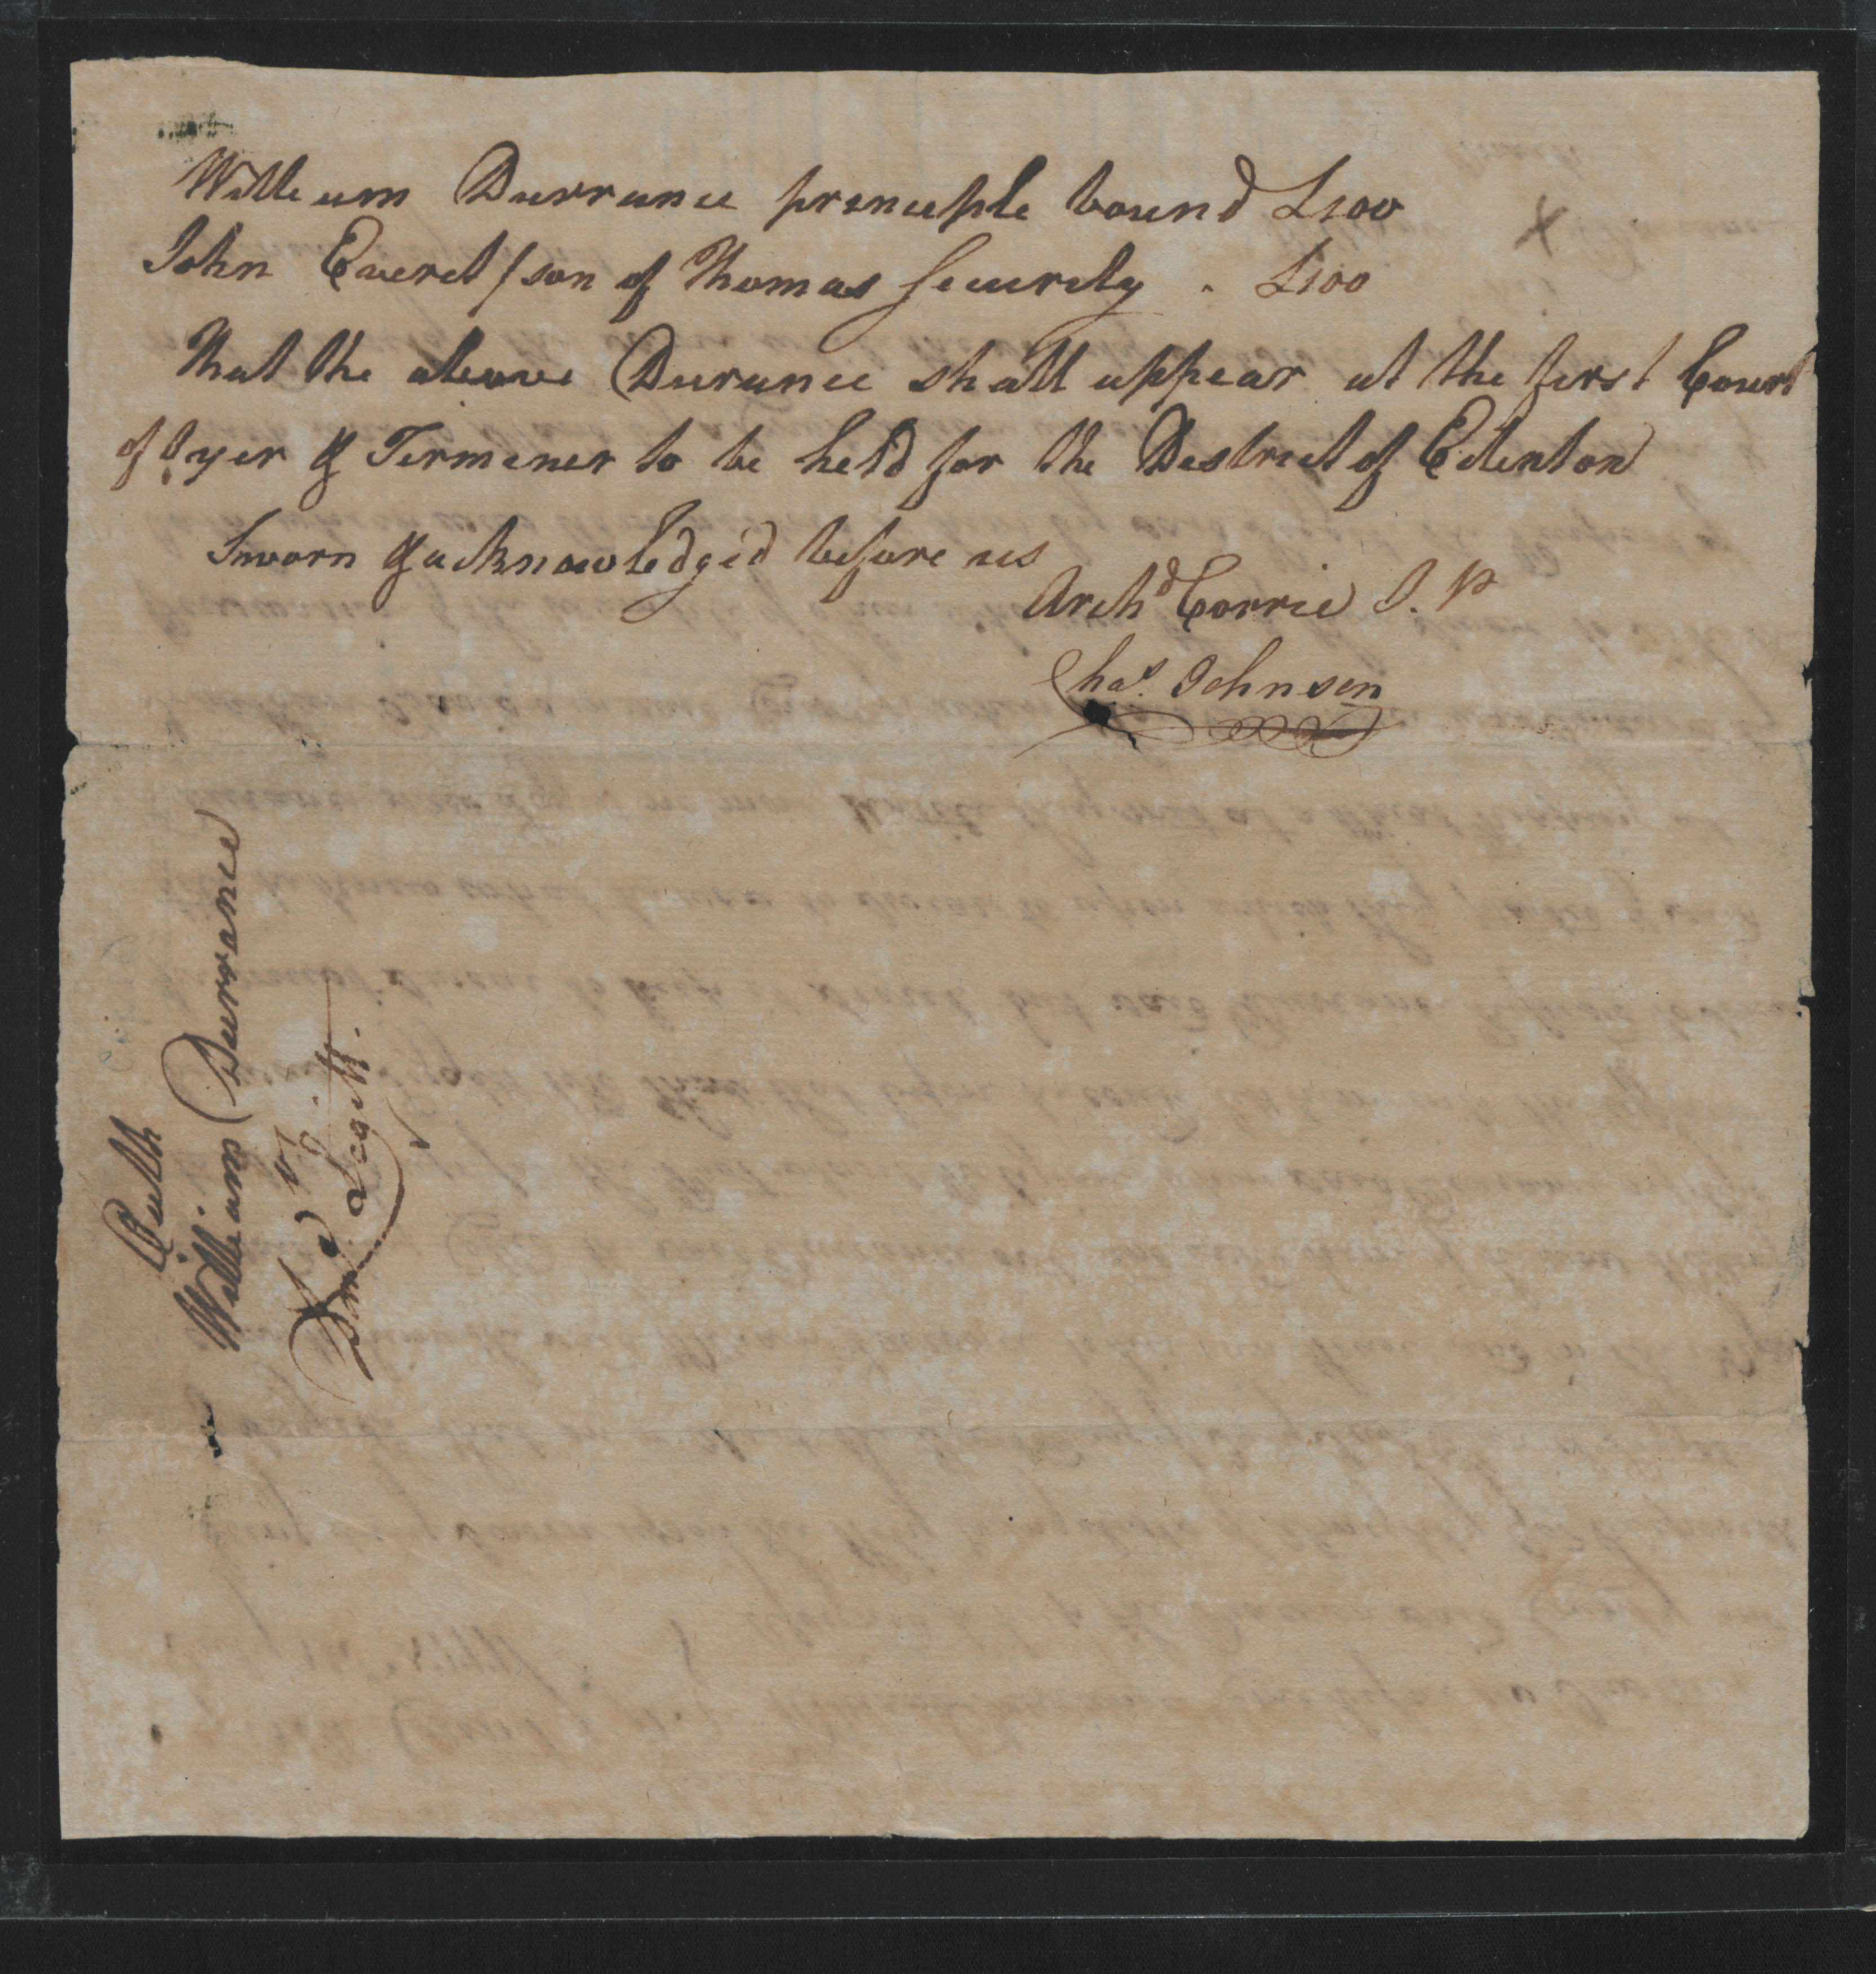 Deposition of William Durrance, 14 July 1777, page 2